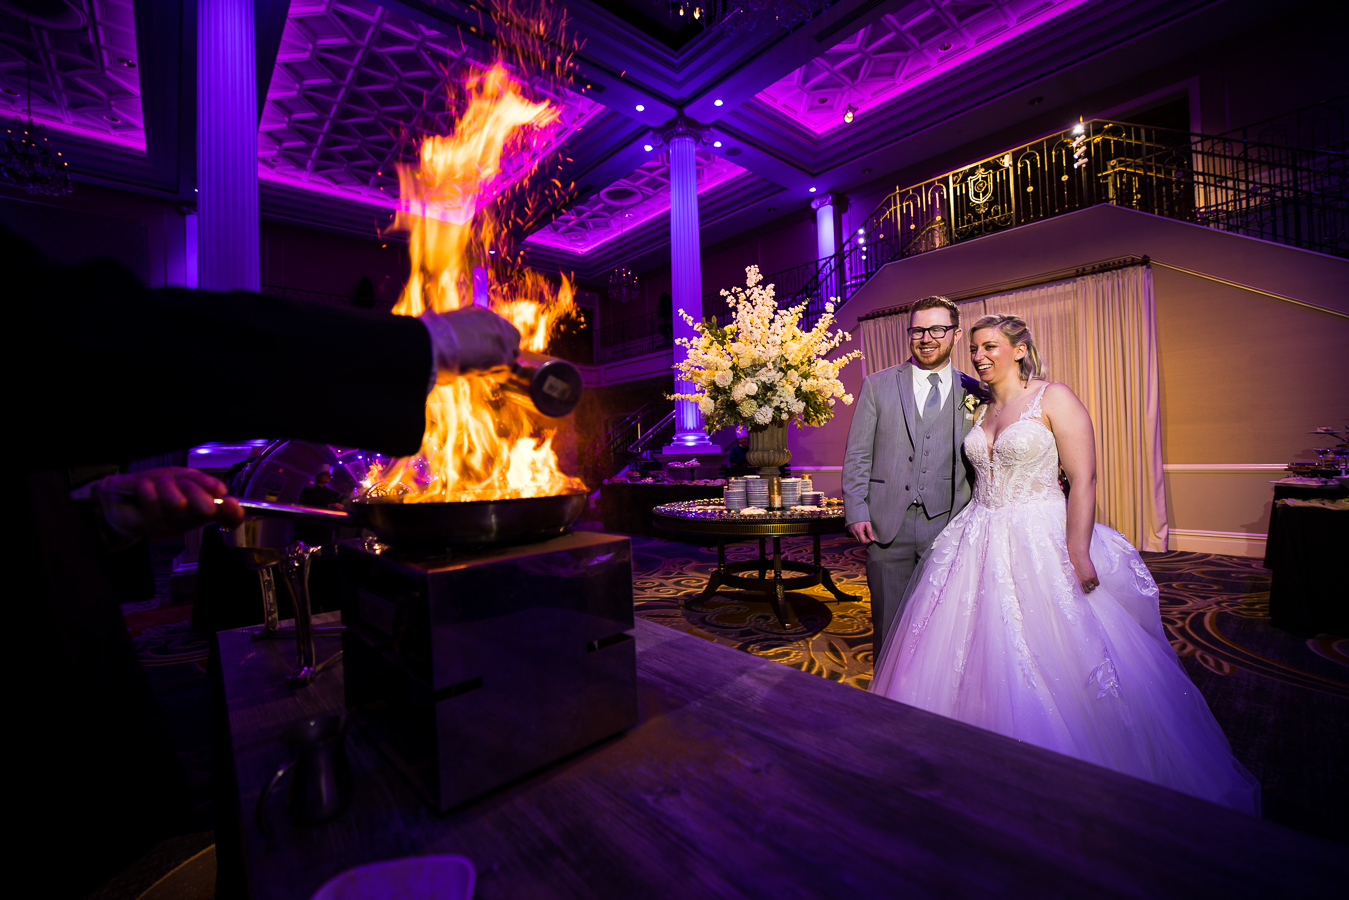 Wedding Photographer, lisa rhinehart, captures this creative image of the bride and groom as they stand next to one another watching the fire inside of the palace at somerset park 